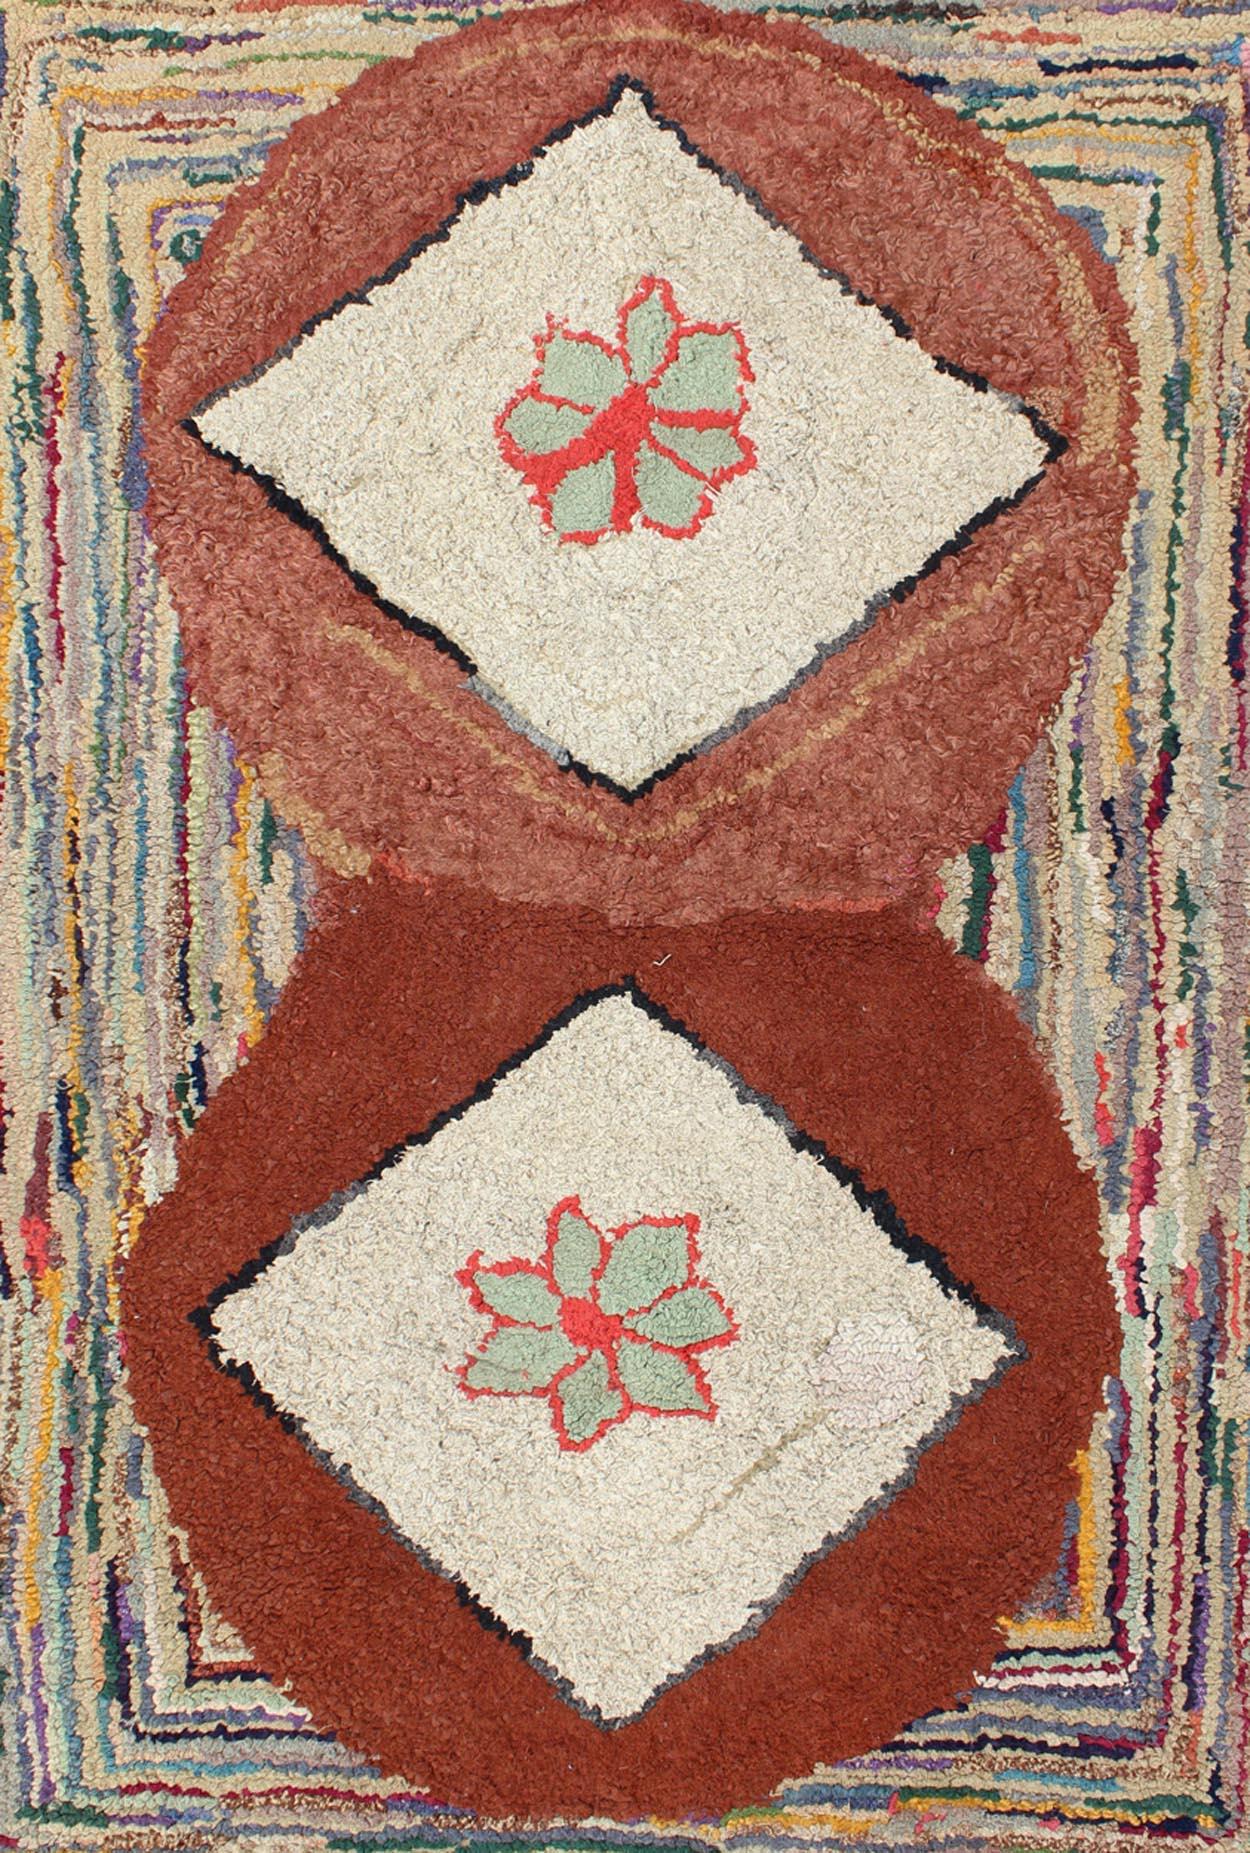 antique american hooked rugs